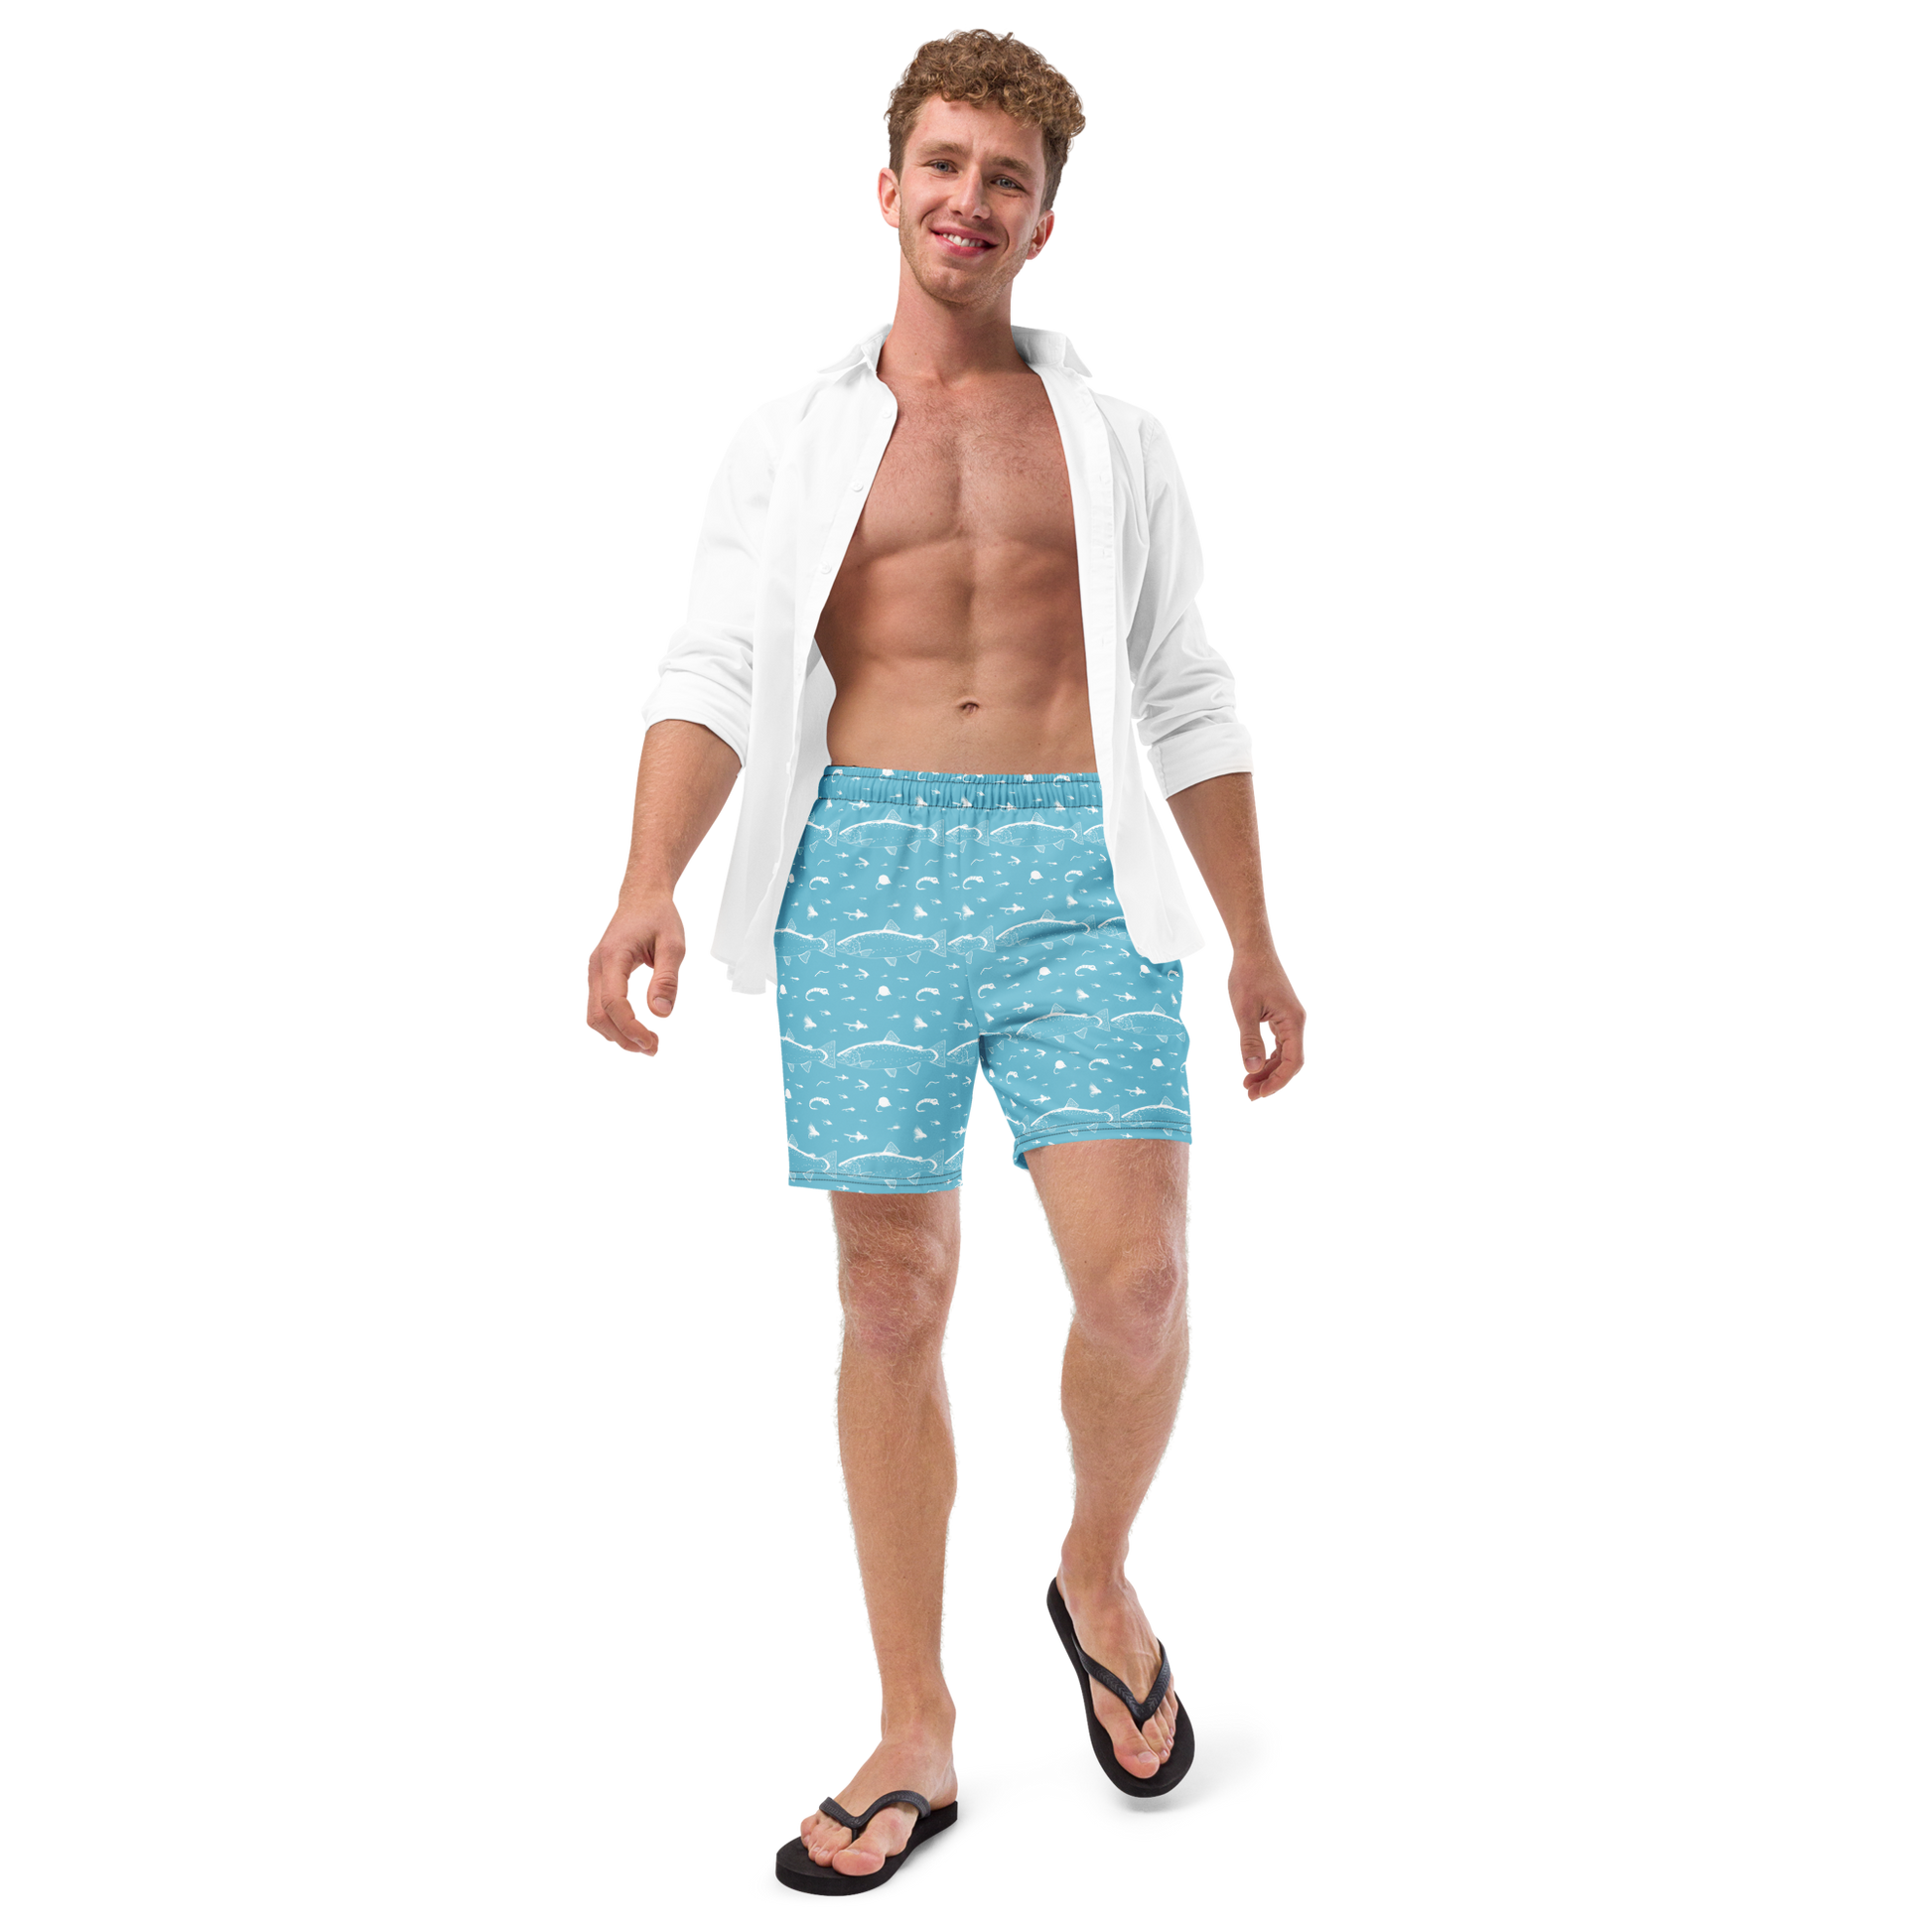 Blue fly fishing shorts / swim trunks. They have a pattern with trout and flies. Model wearing shorts 